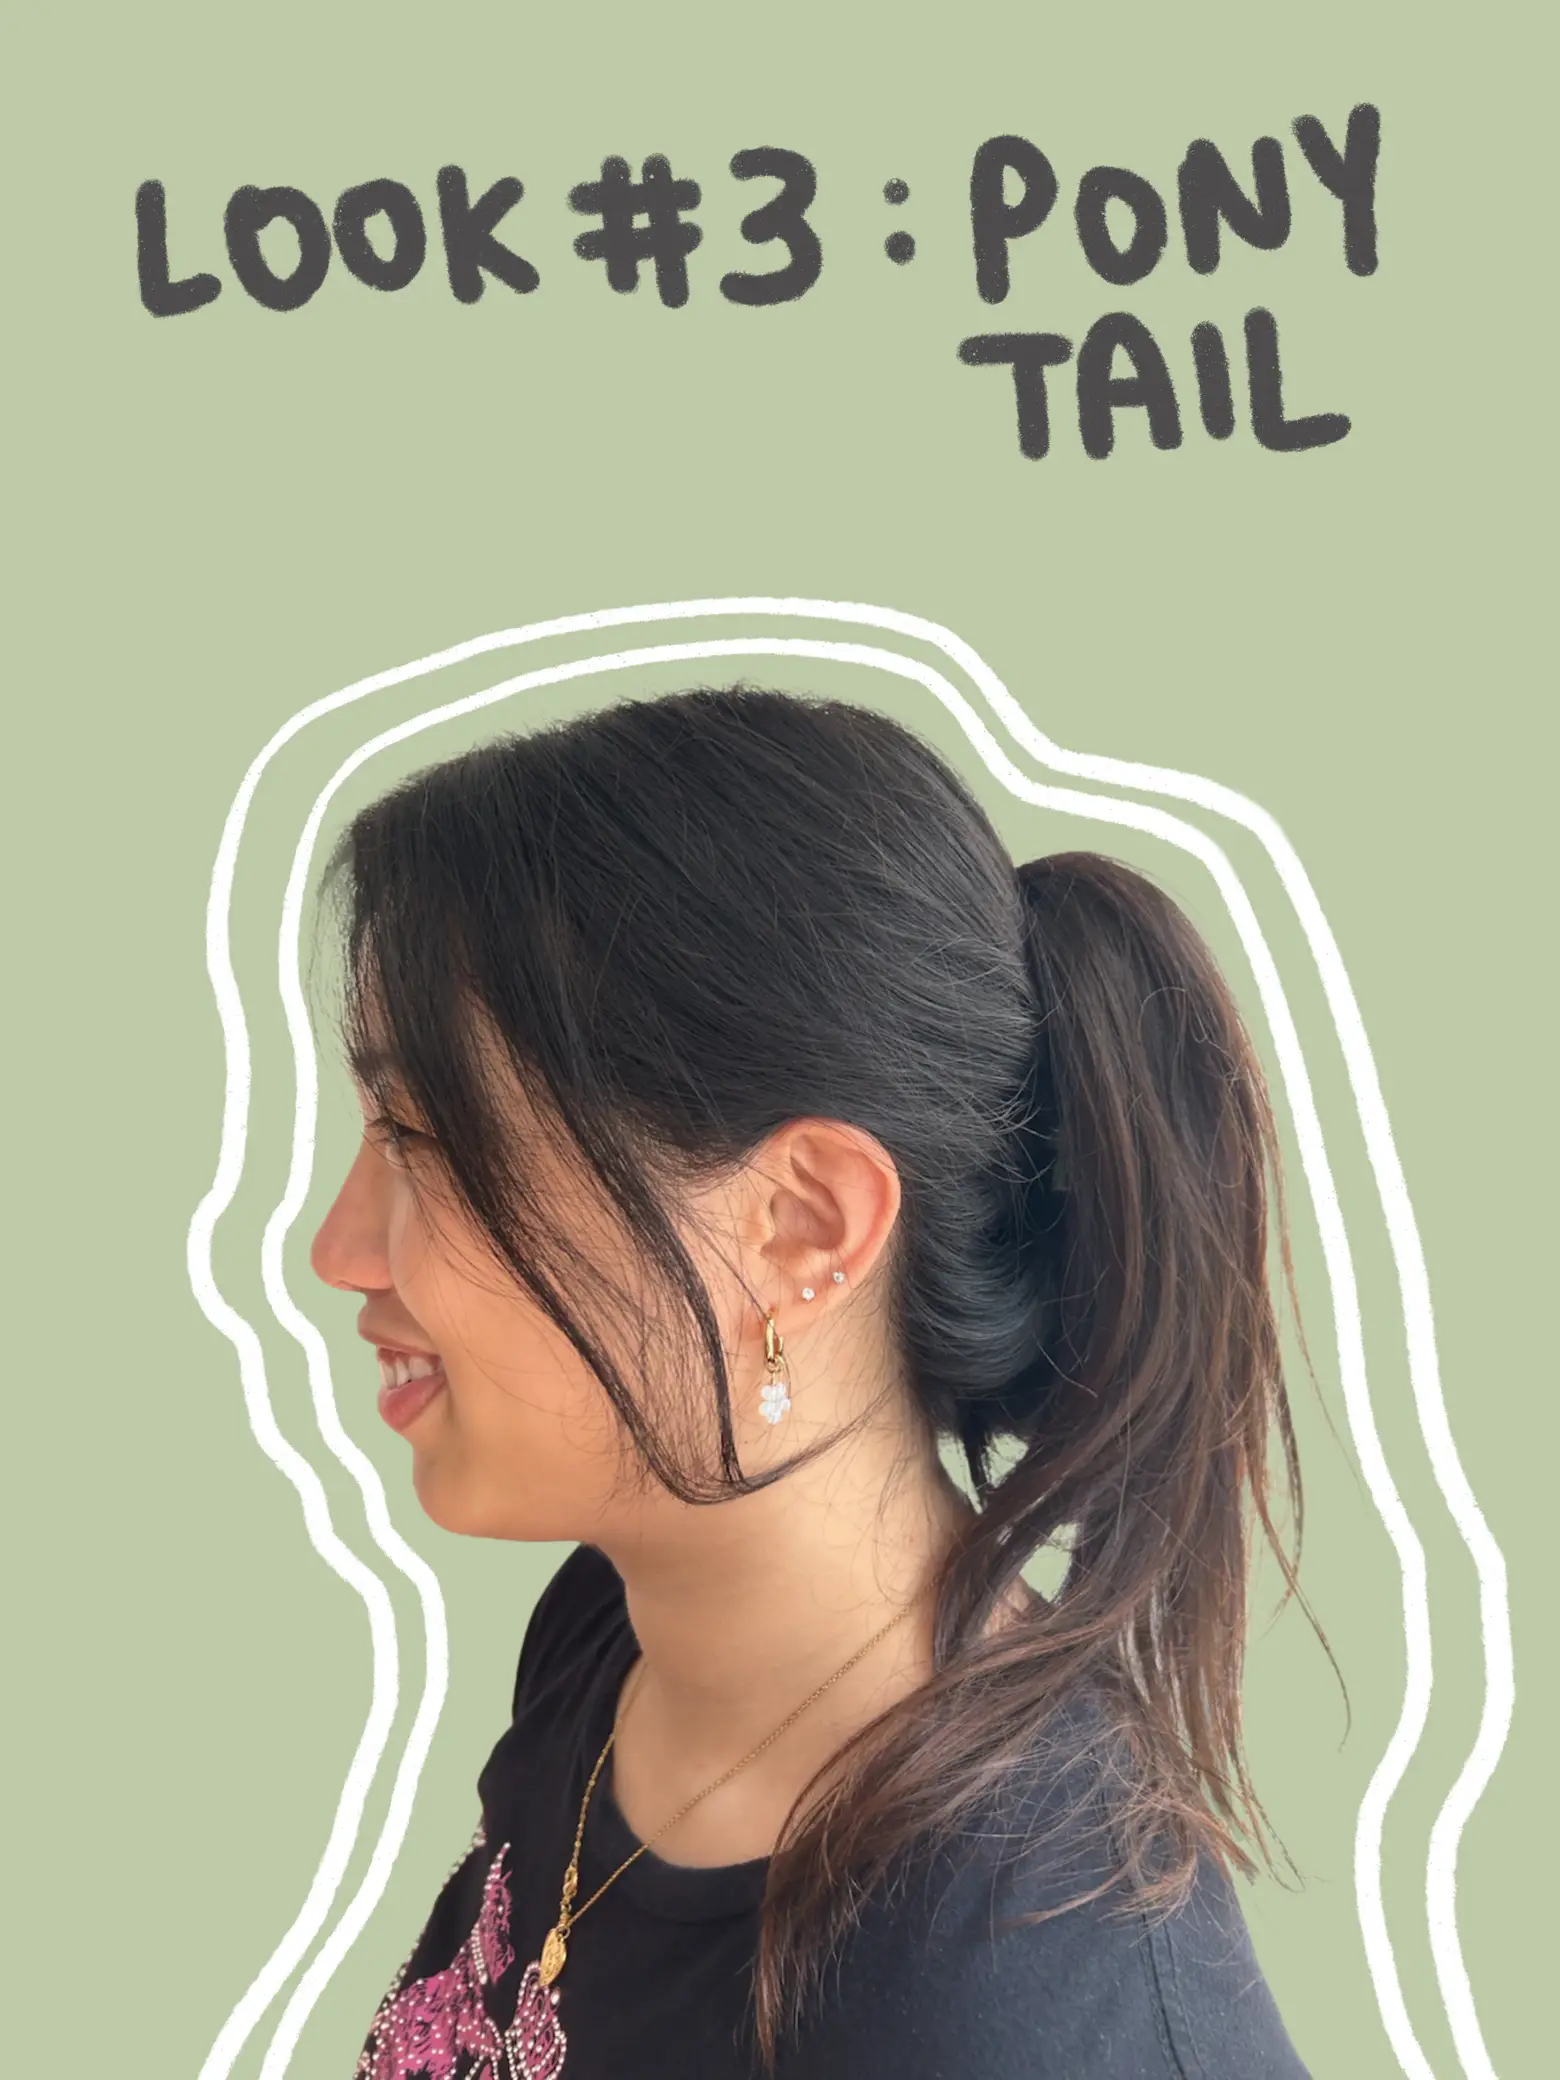 3 easy claw clip hairstyles for long hair! 👩🏻🎀, Gallery posted by chloe